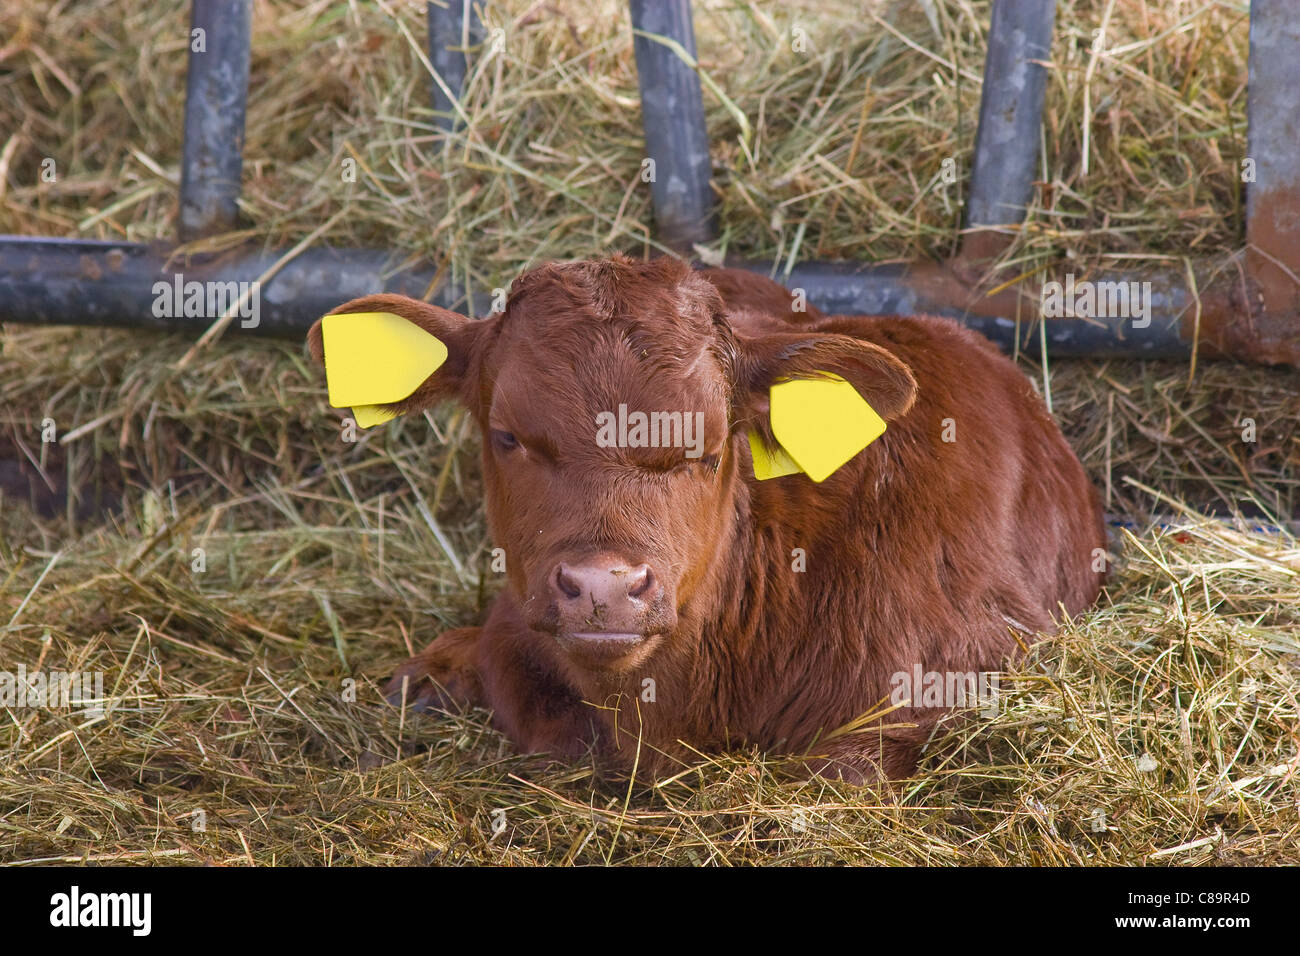 Germany, Cattle calf with labelled ears sitting on hay Stock Photo